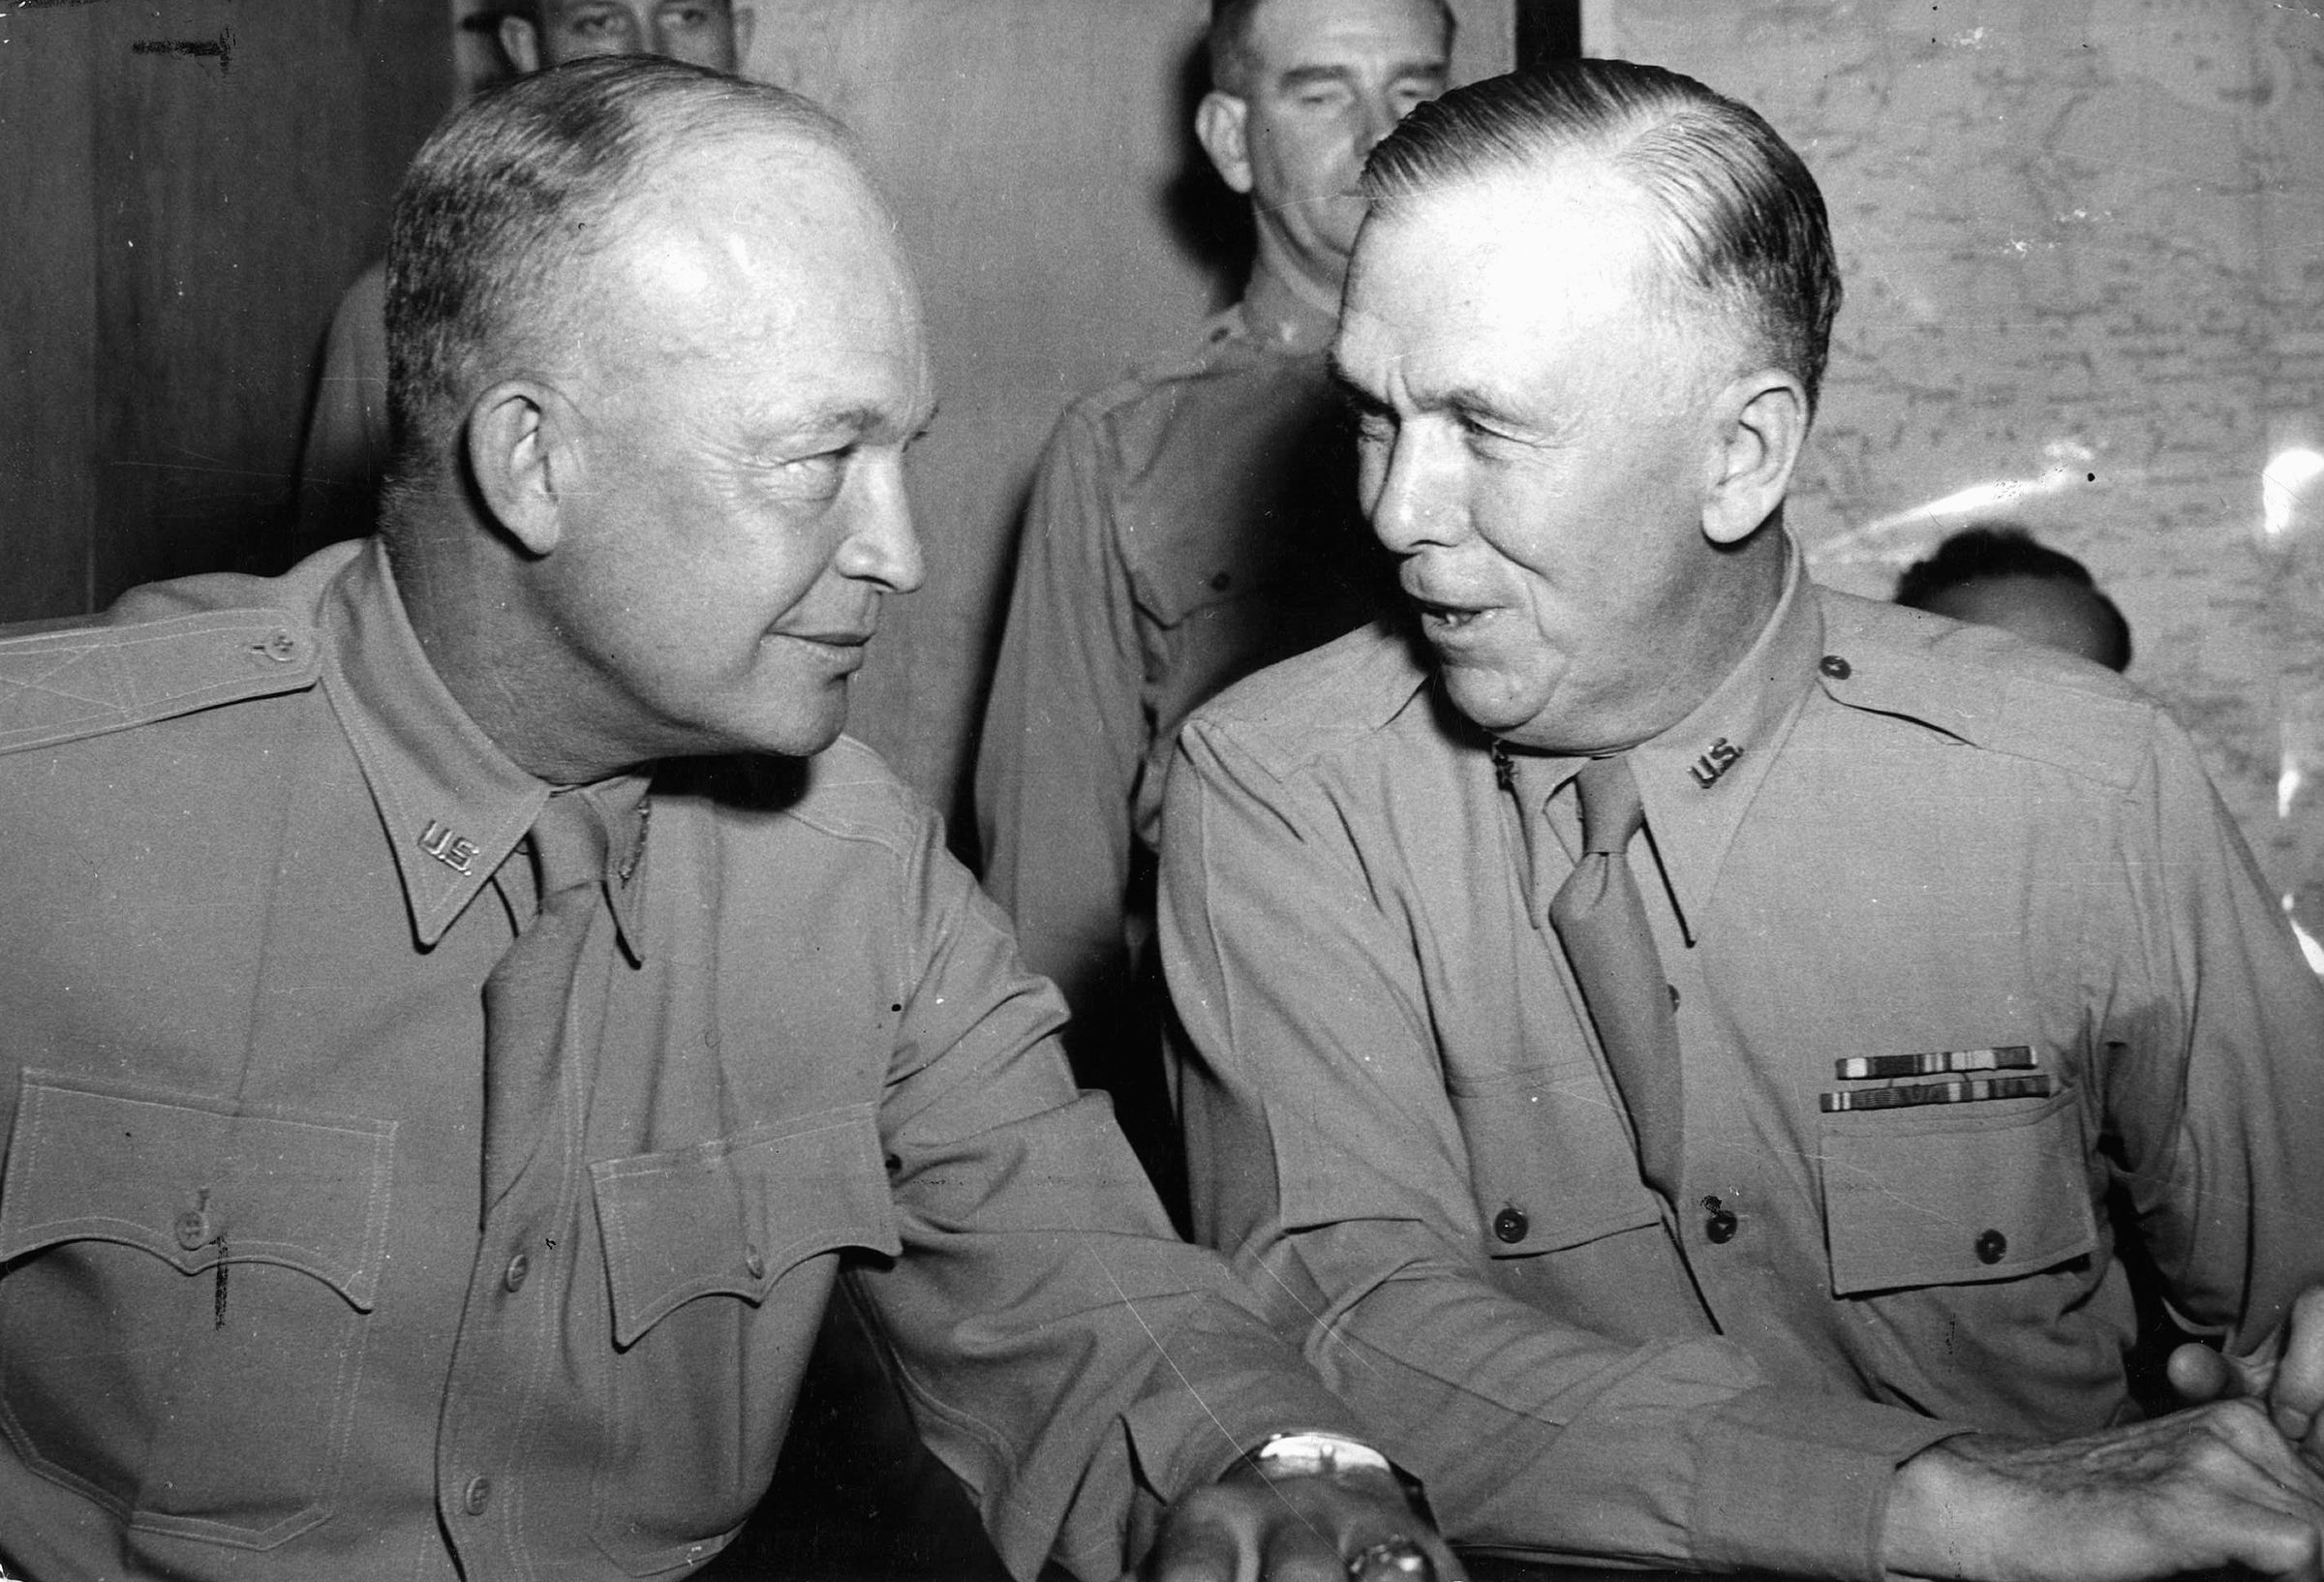 General Dwight D. Eisenhower (left), Supreme Commander of Allied forces in Europe, confers with General George C. Marshall, Army chief of staff.